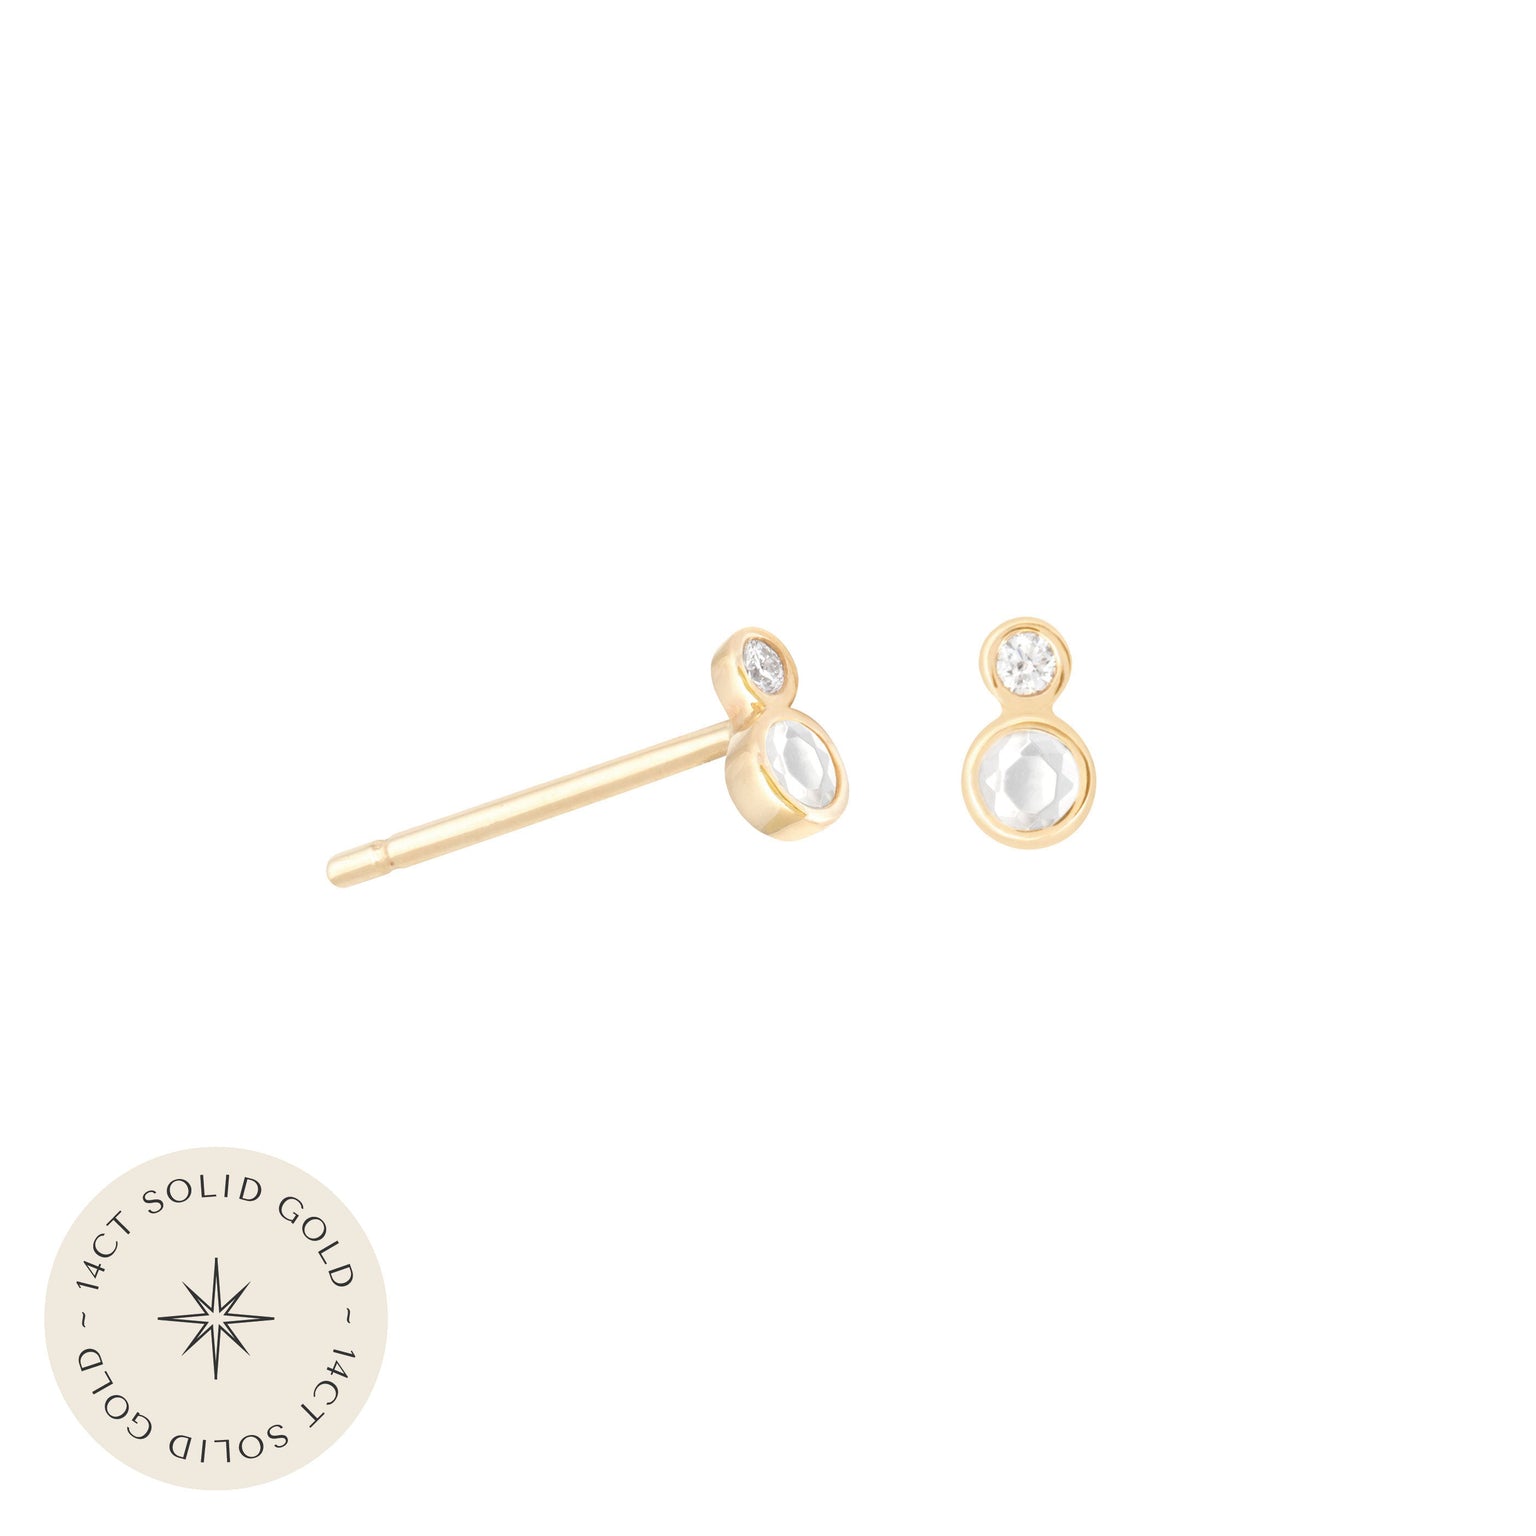 Double Topaz Stud Earrings in Solid Gold with 14CT solid gold label